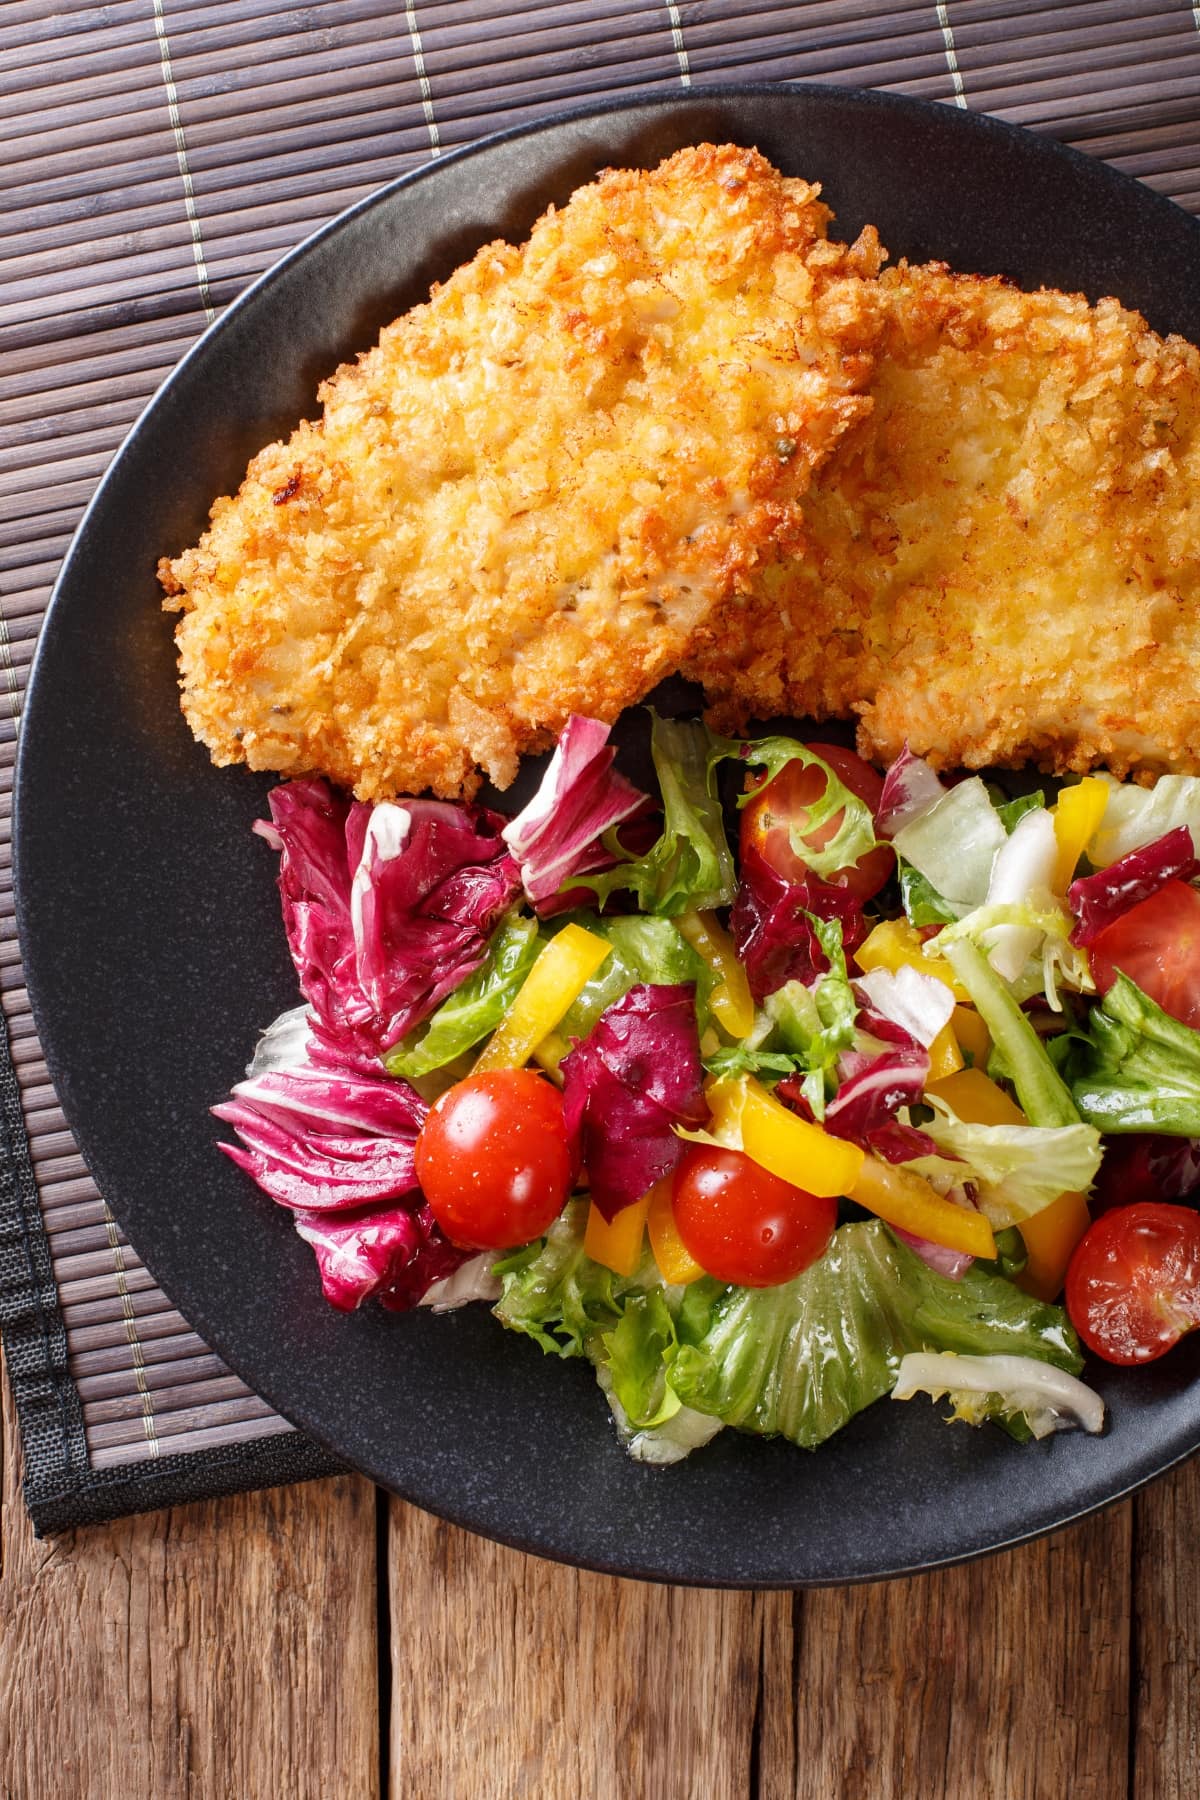 A plate of food with a fresh vegetable salad and a succulent chicken schnitzel. A delicious and healthy meal option